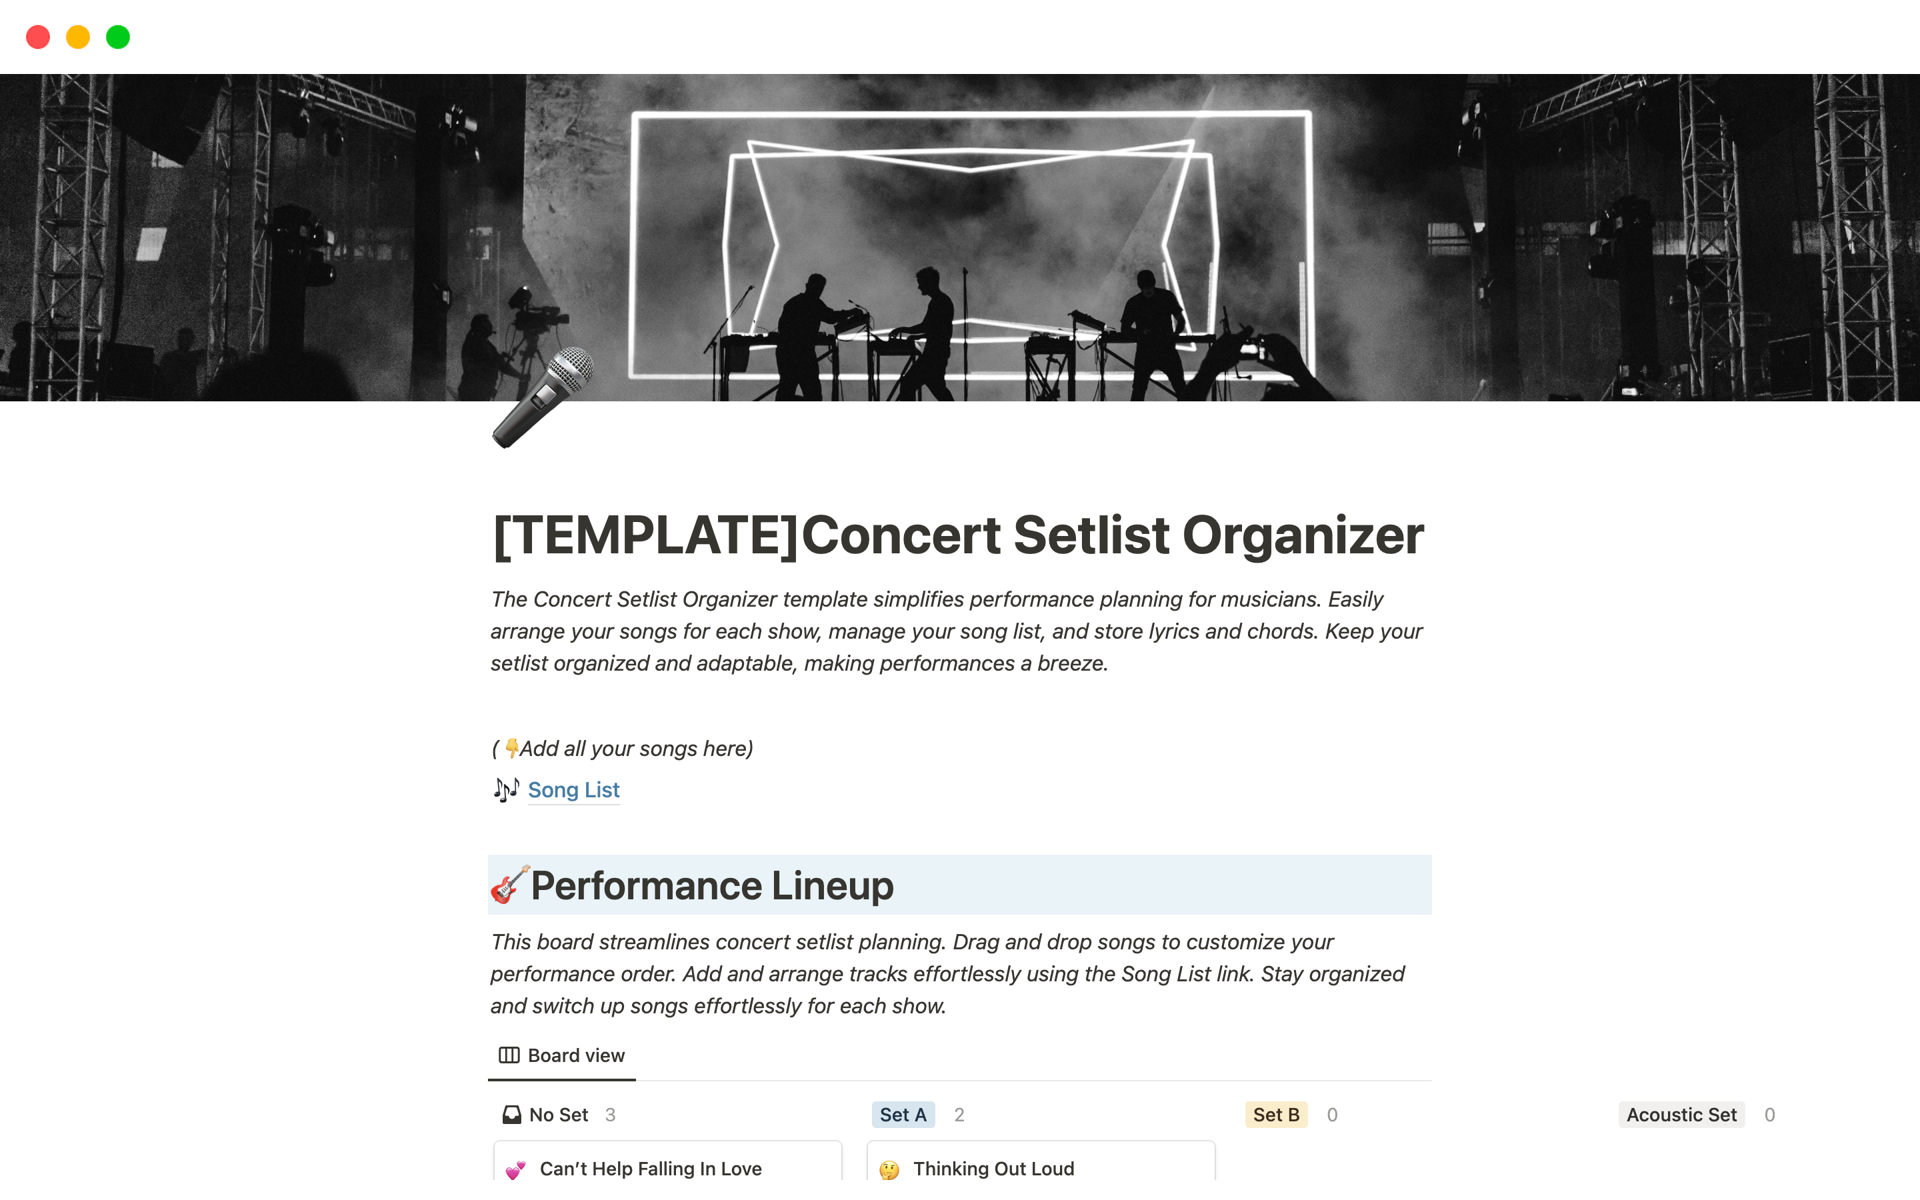 A comprehensive Notion template that streamlines concert setlist creation, technical setup, and event management for elevated performances.